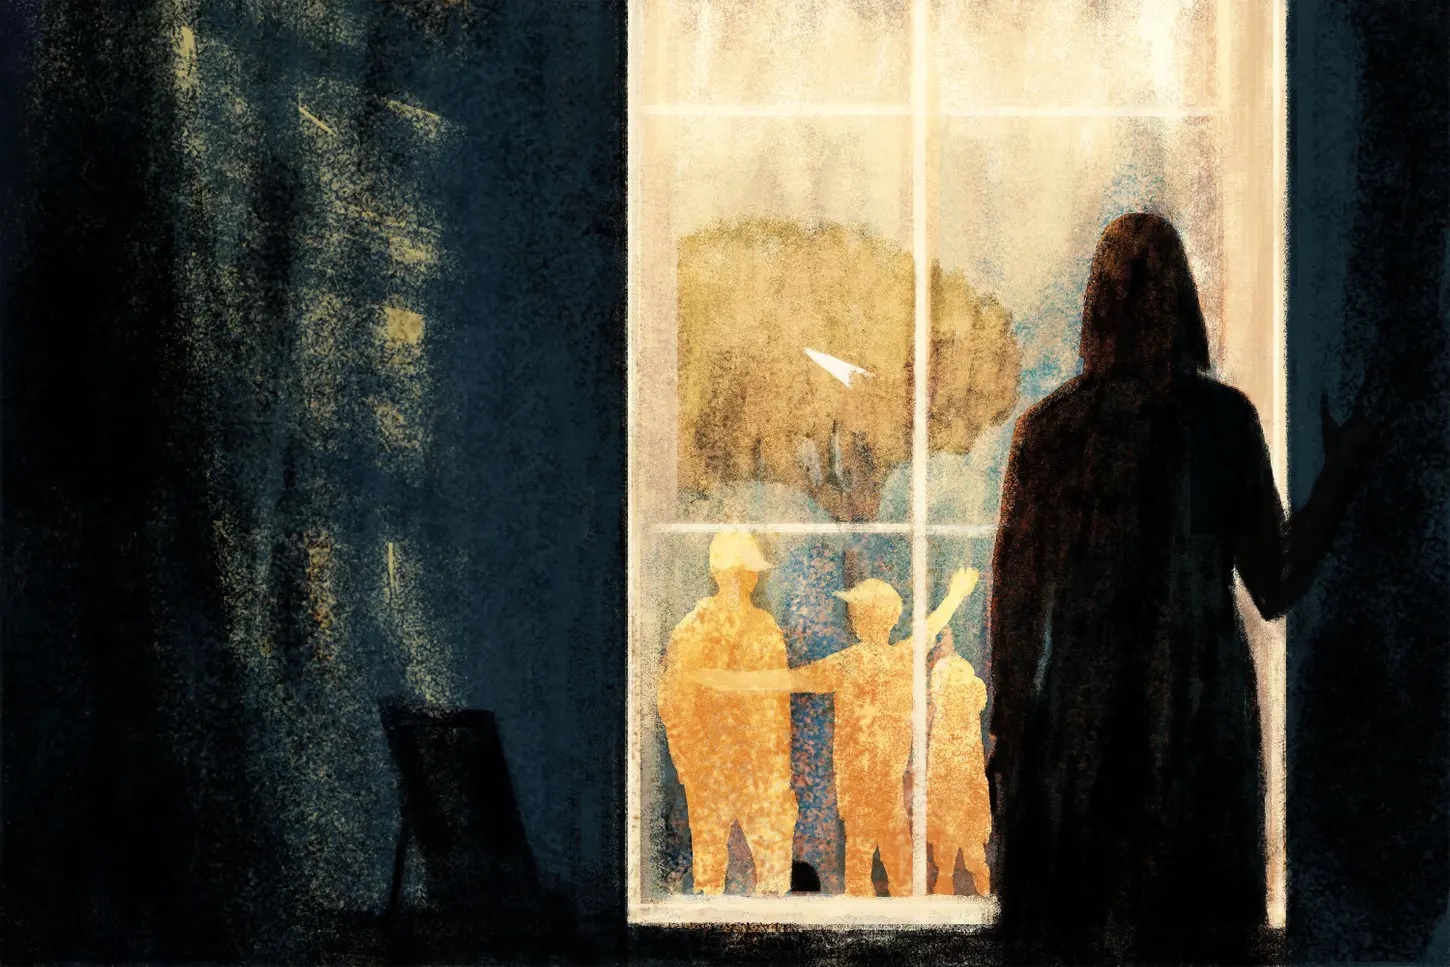 Georgia foster care; When the number of bedrooms in a home keeps parents from getting their kids back: graphic of woman in dark room looking out a window at children outside